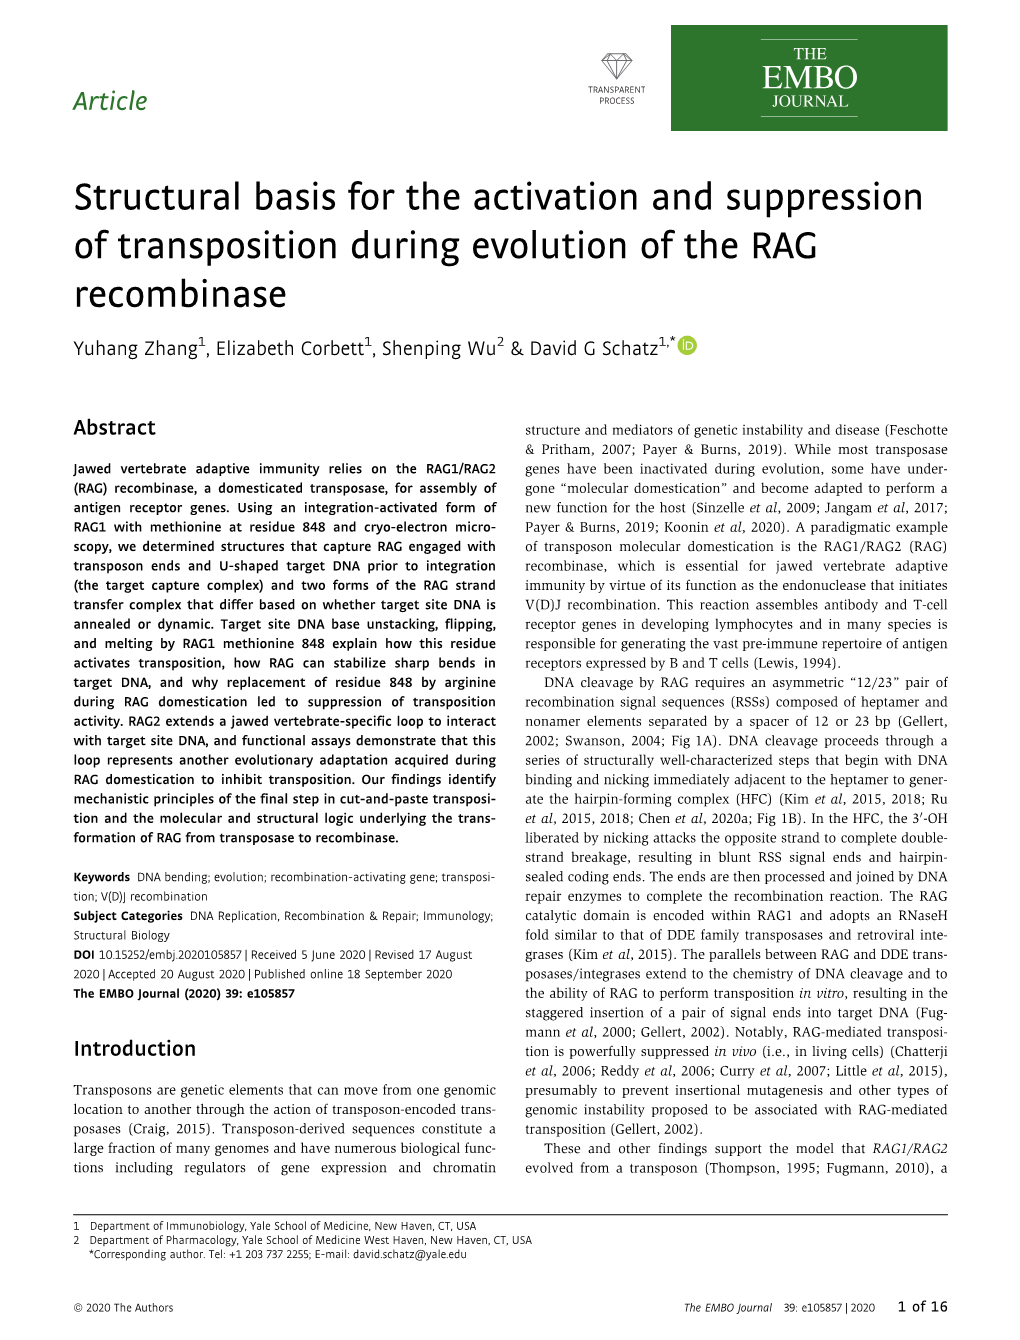 Structural Basis for the Activation and Suppression of Transposition During Evolution of the RAG Recombinase